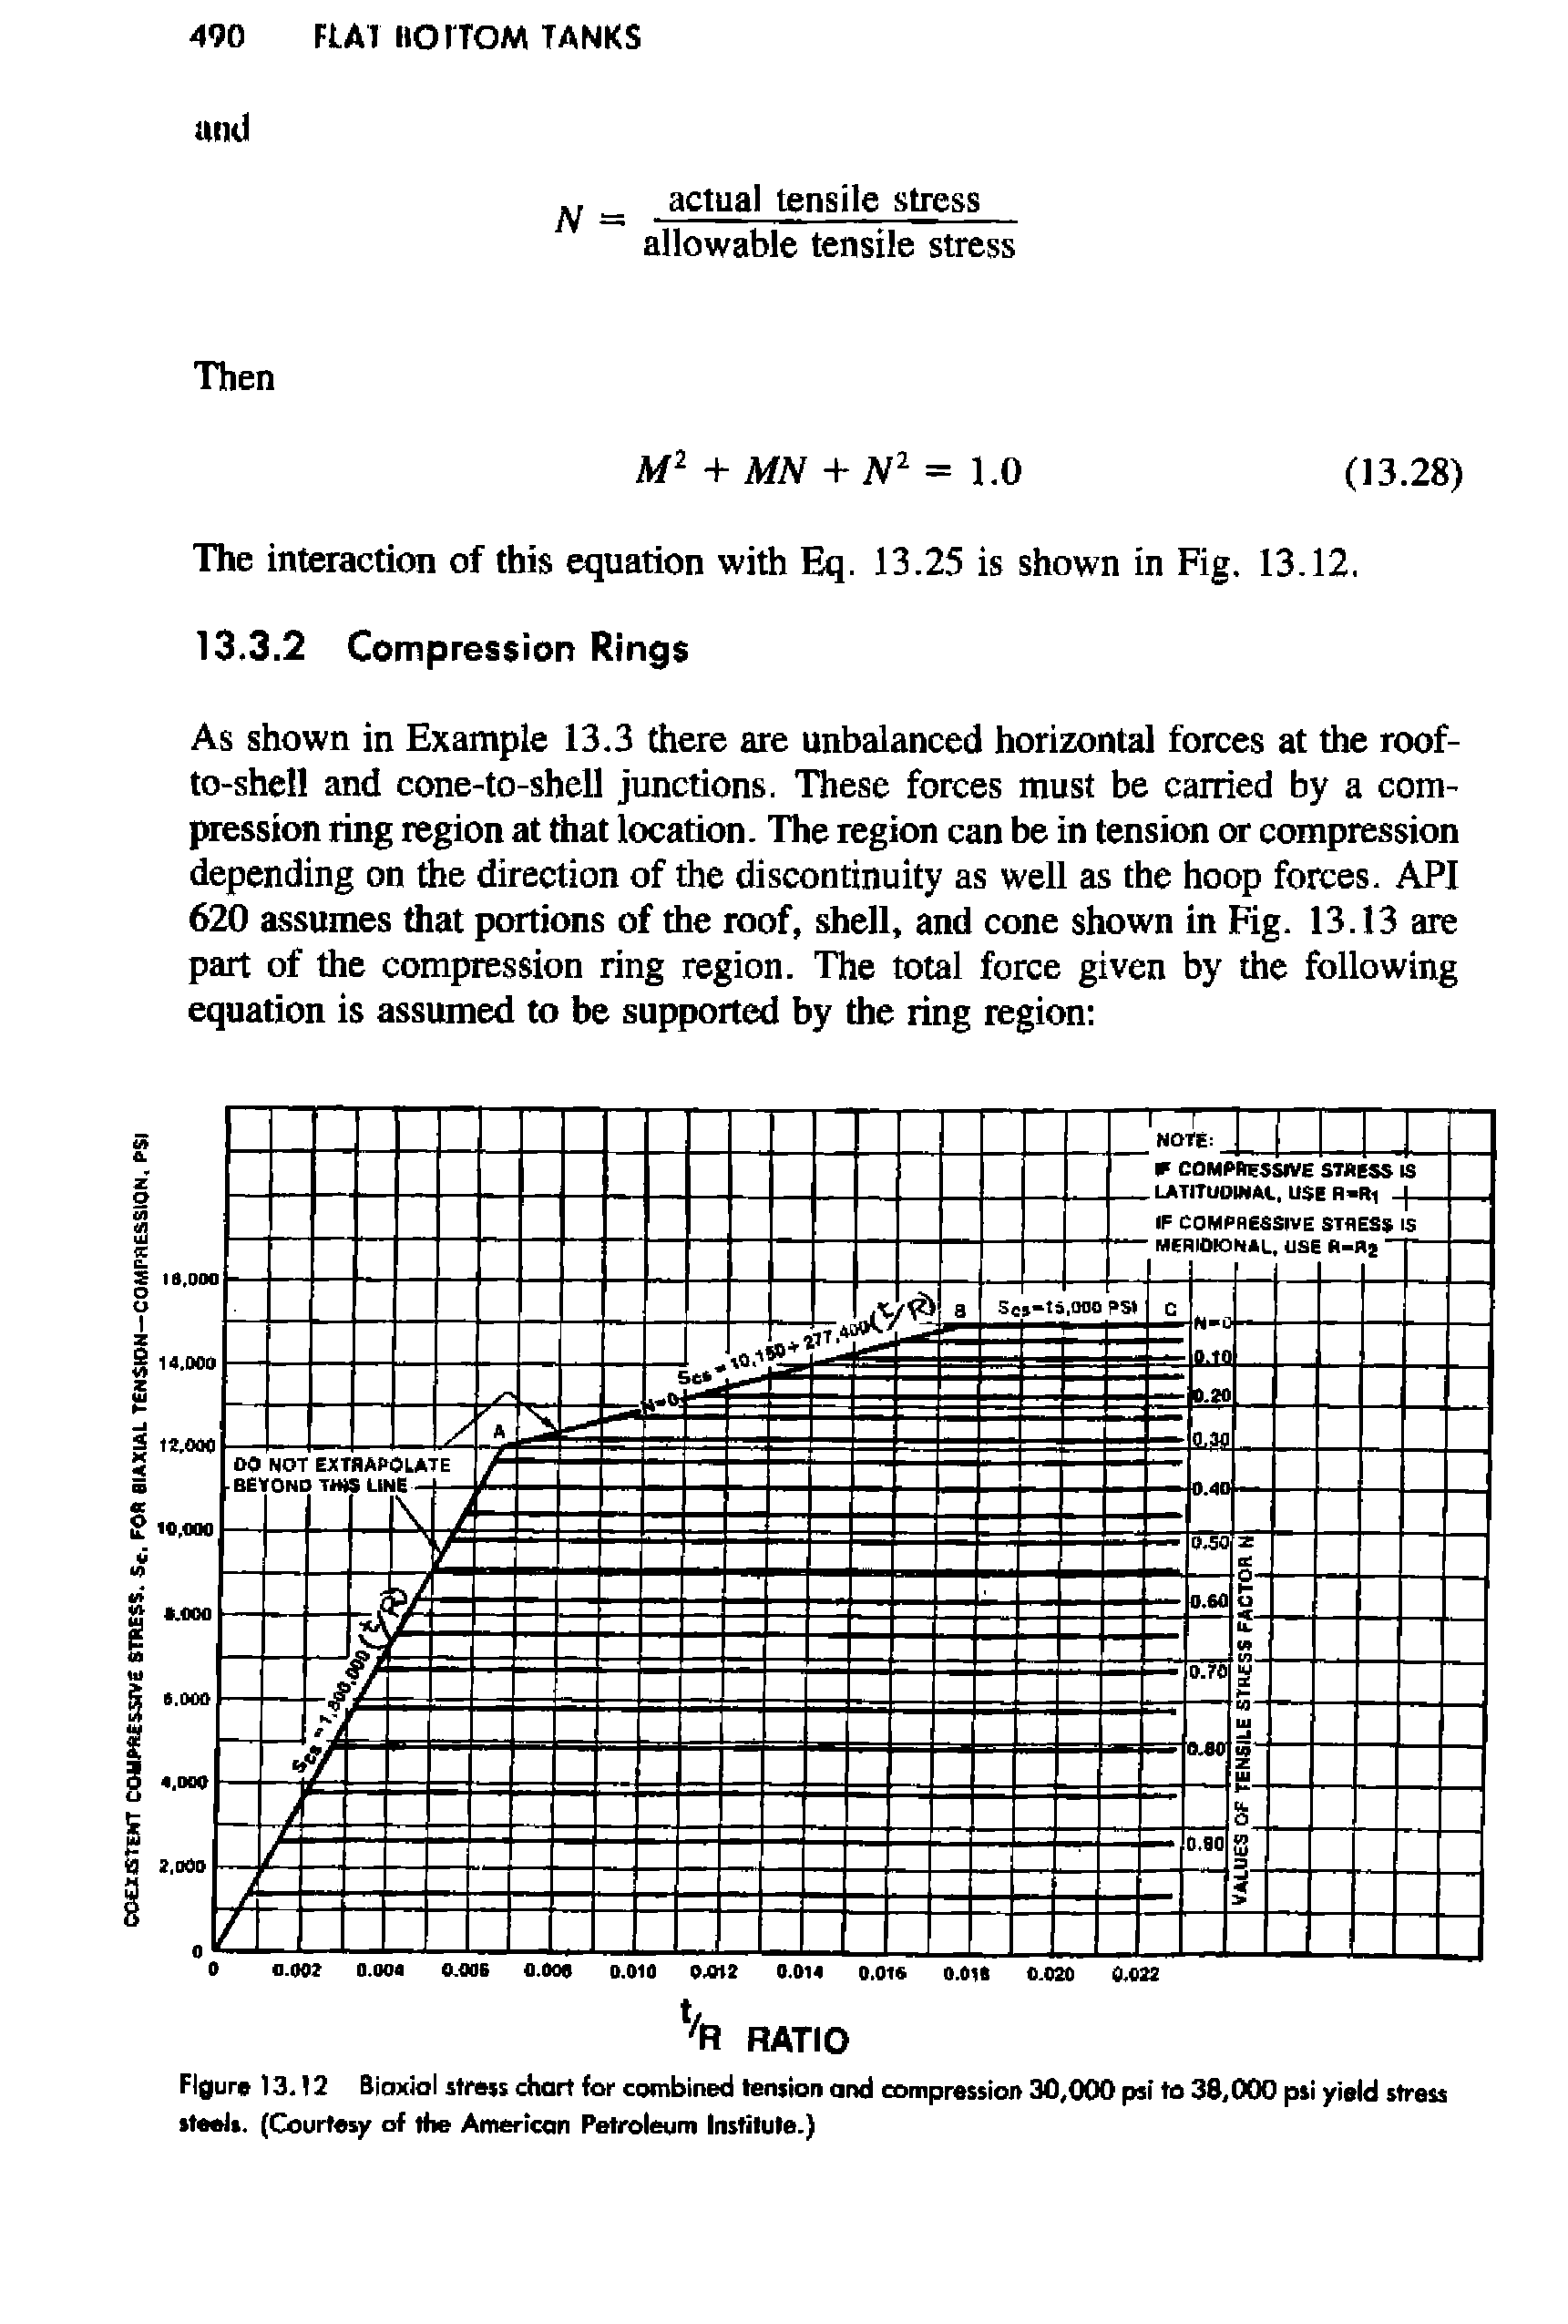 Figure 13.12 Biaxial strsis chart for combined Isniion and compression 30,000 psi to 38,000 psi yield stress steels. (Courtesy of the American Petroleum Institute.)...